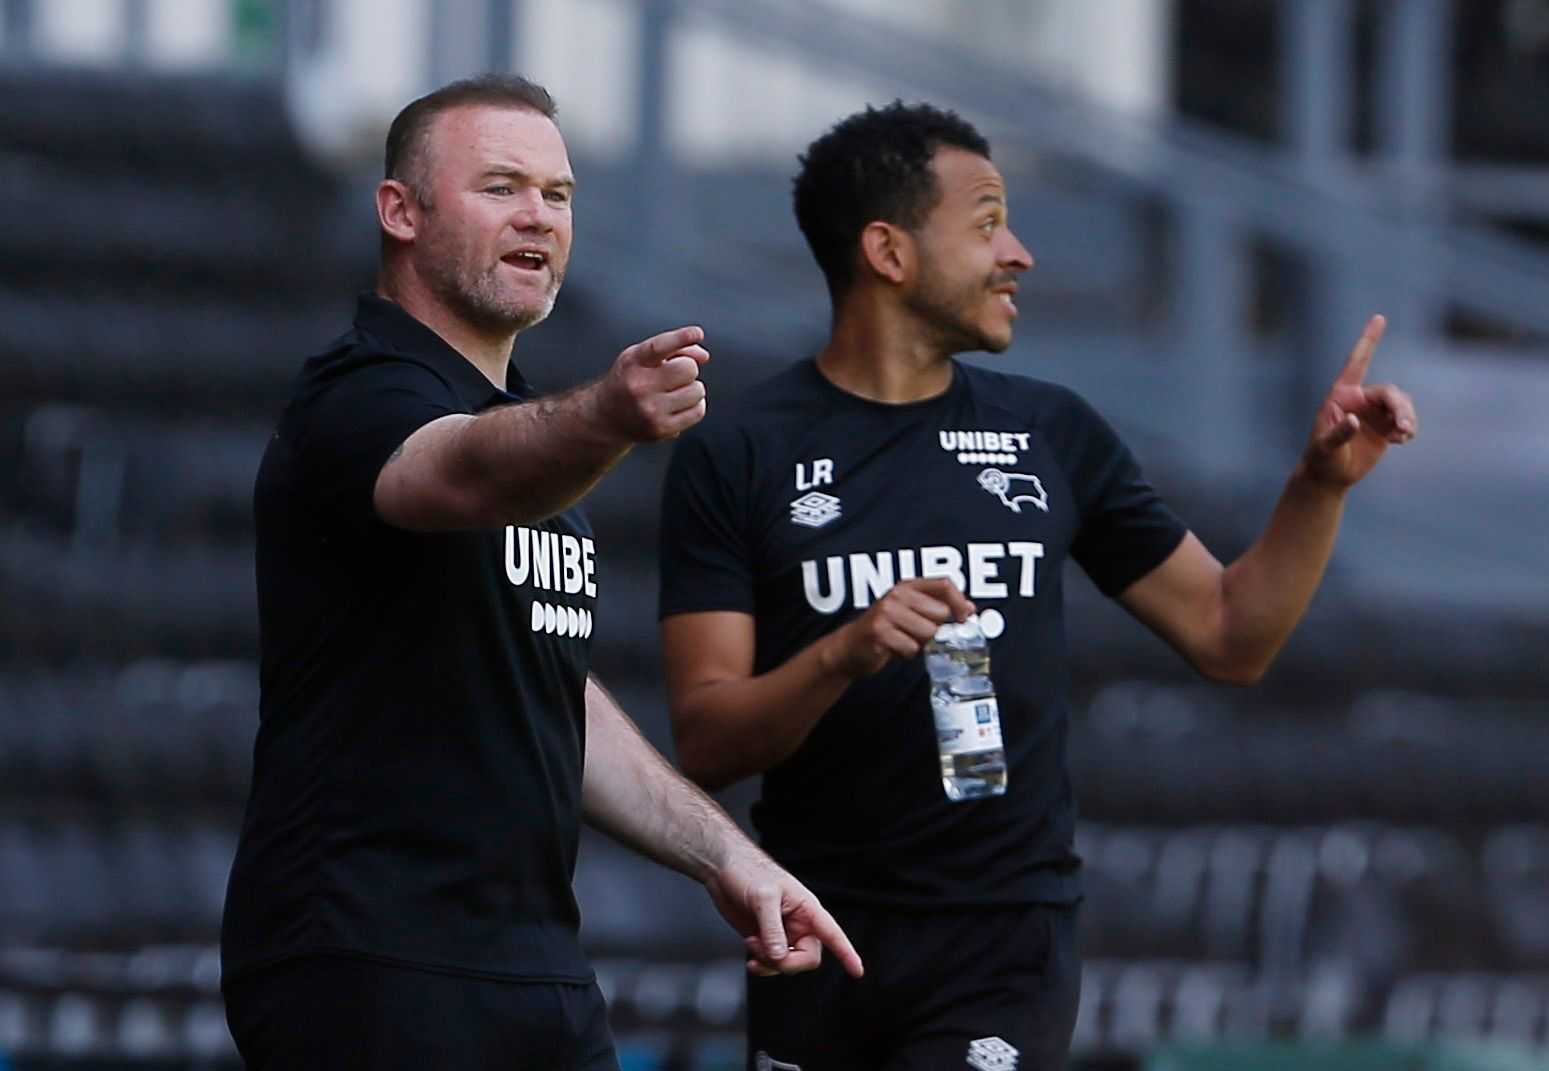 Soccer Football - Pre Season Friendly - Derby County v Manchester United - Pride Park, Derby, Britain - July 18, 2021 Derby County manager Wayne Rooney Action Images via Reuters/Craig Brough